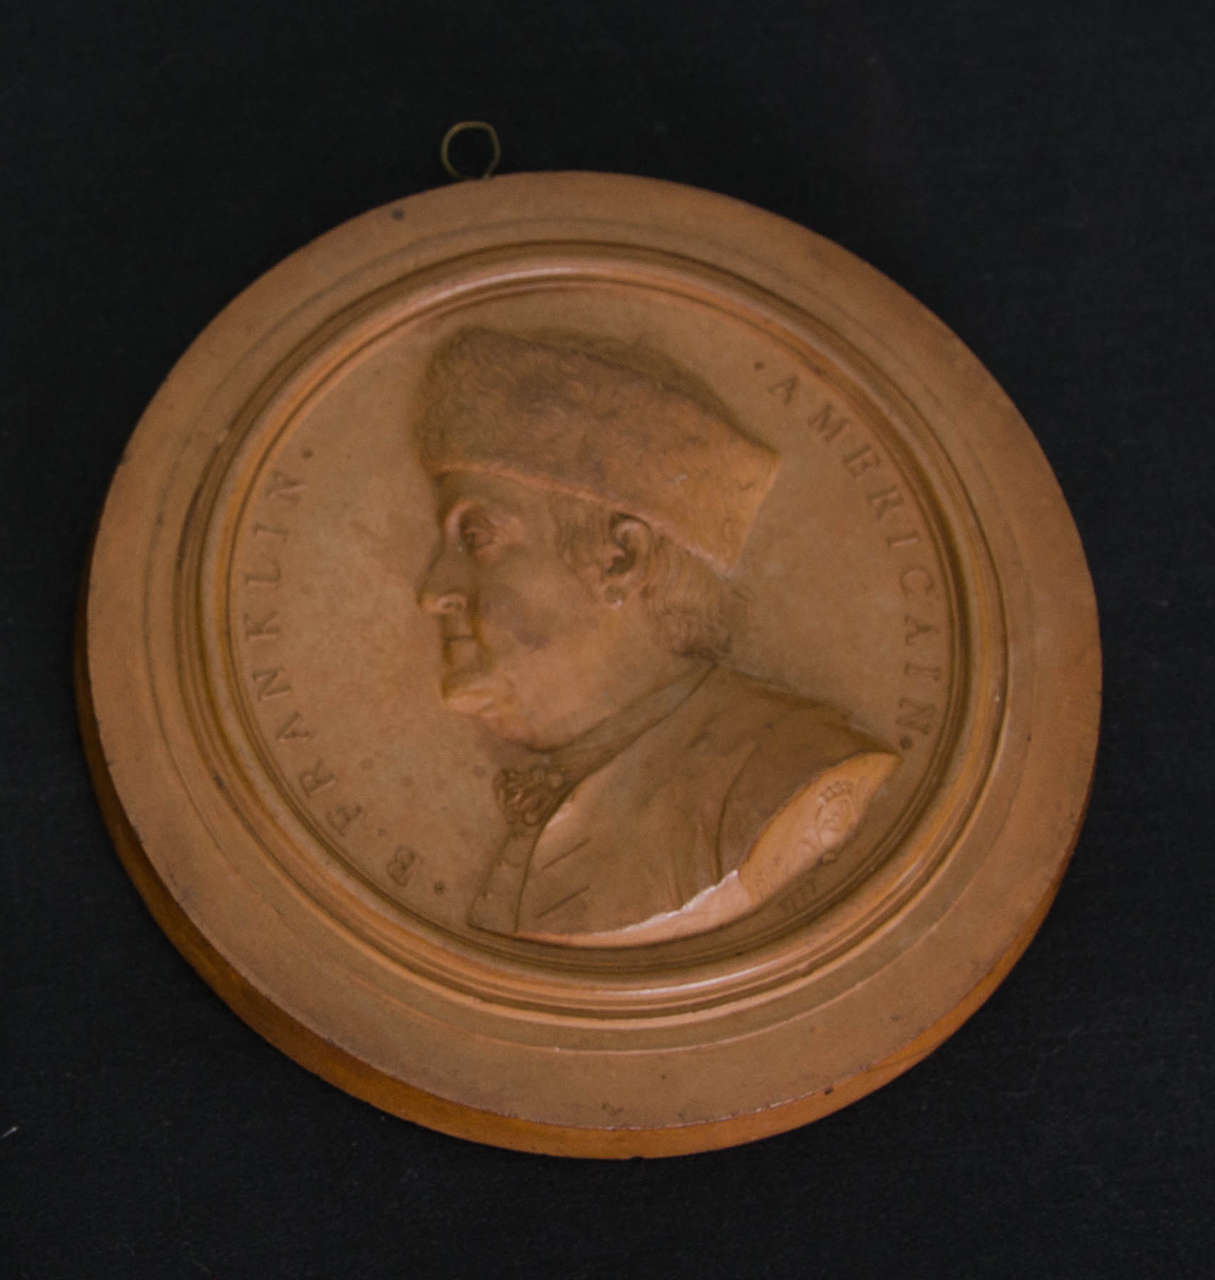 The Italian artist, Jean Baptiste (or Giovanni Battista) Nini, based his portrait of Franklin on a drawing by Thomas Walpole, the young son of an associate of Franklin. The bas-relief medallion is enclosed by a narrow moulding with the interior